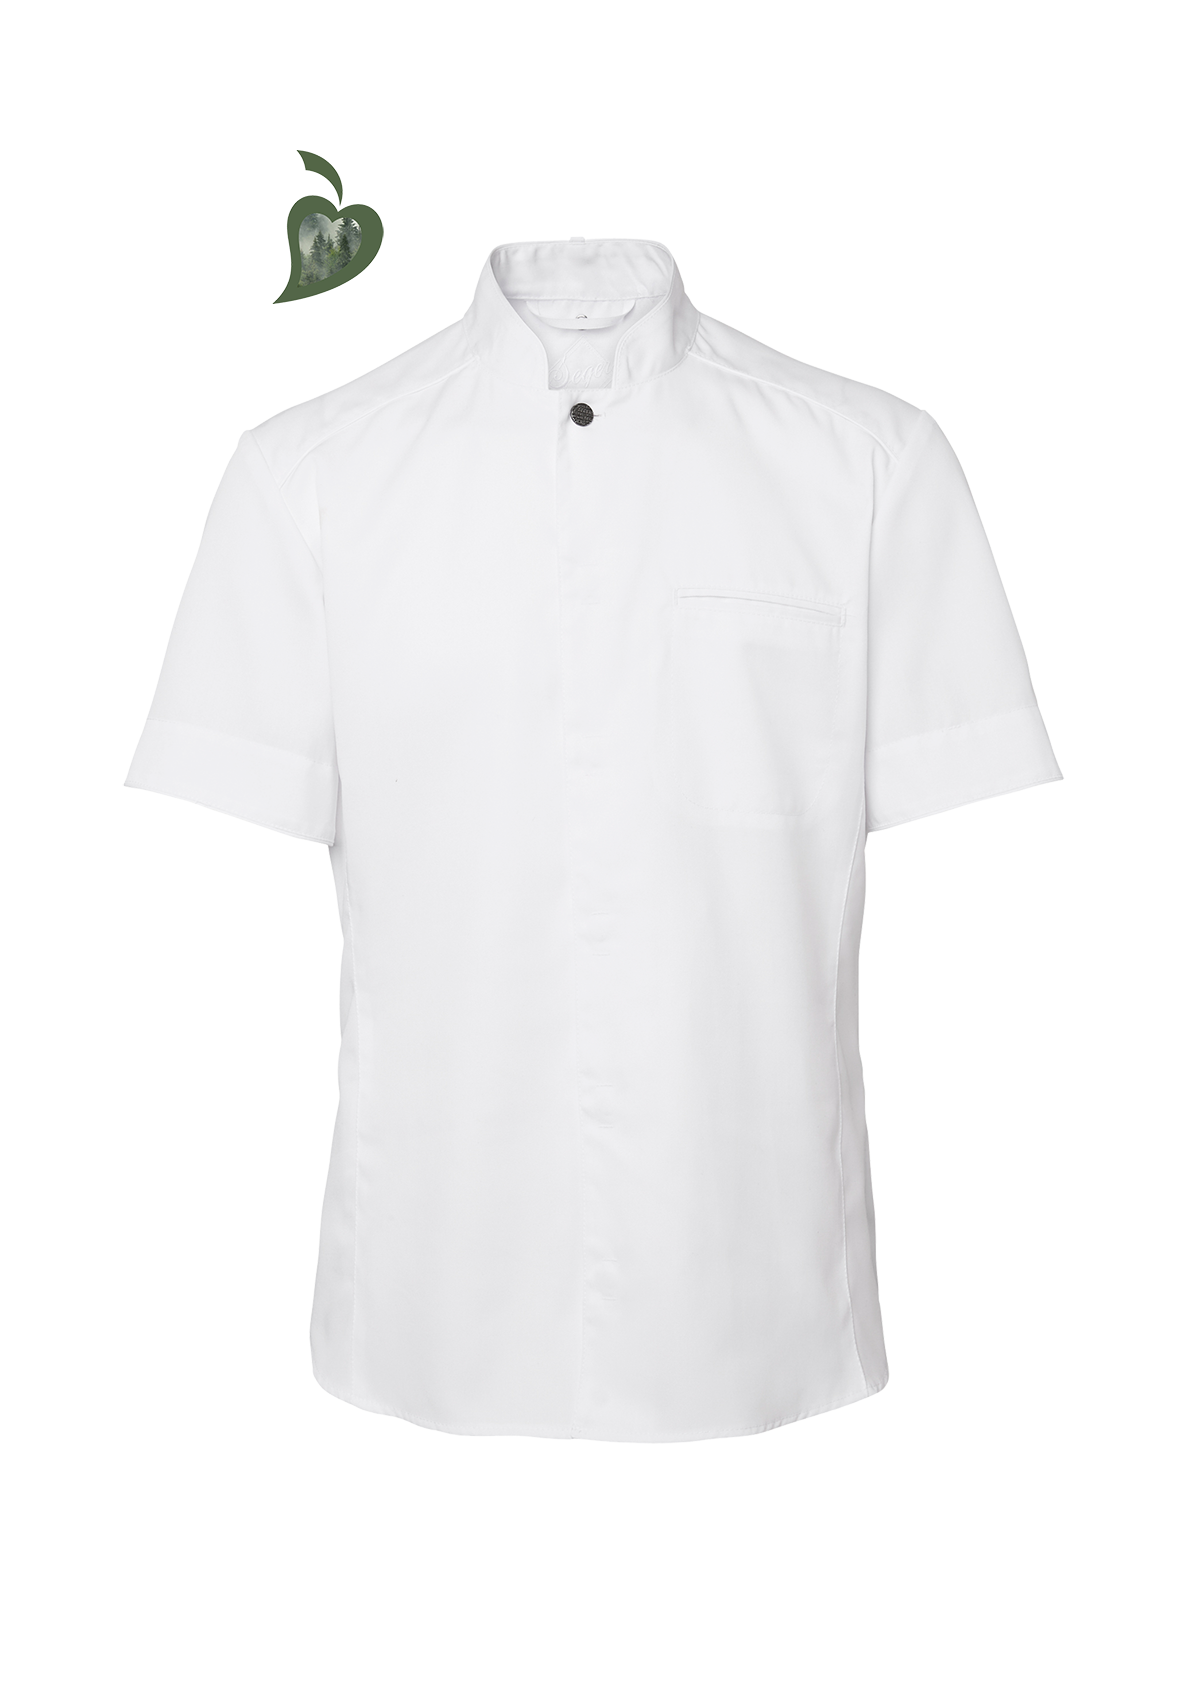 Men's chef shirt in slim-fit with short sleeves. Segers | Cookniche